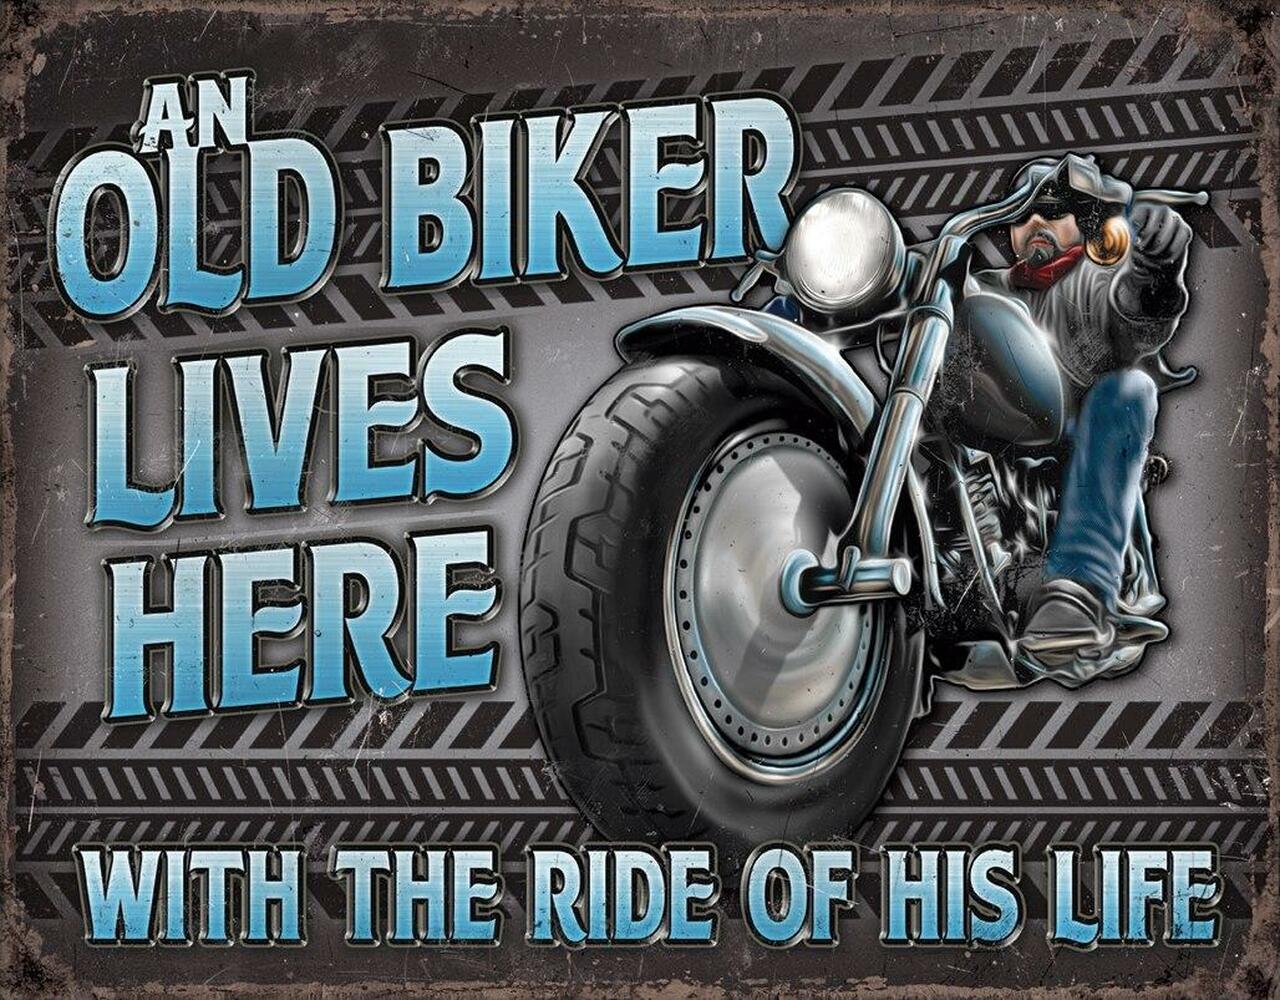 Old Biker Lives Here With The Ride Of His Life 16" x 12.5" Metal Tin Sign - 2236